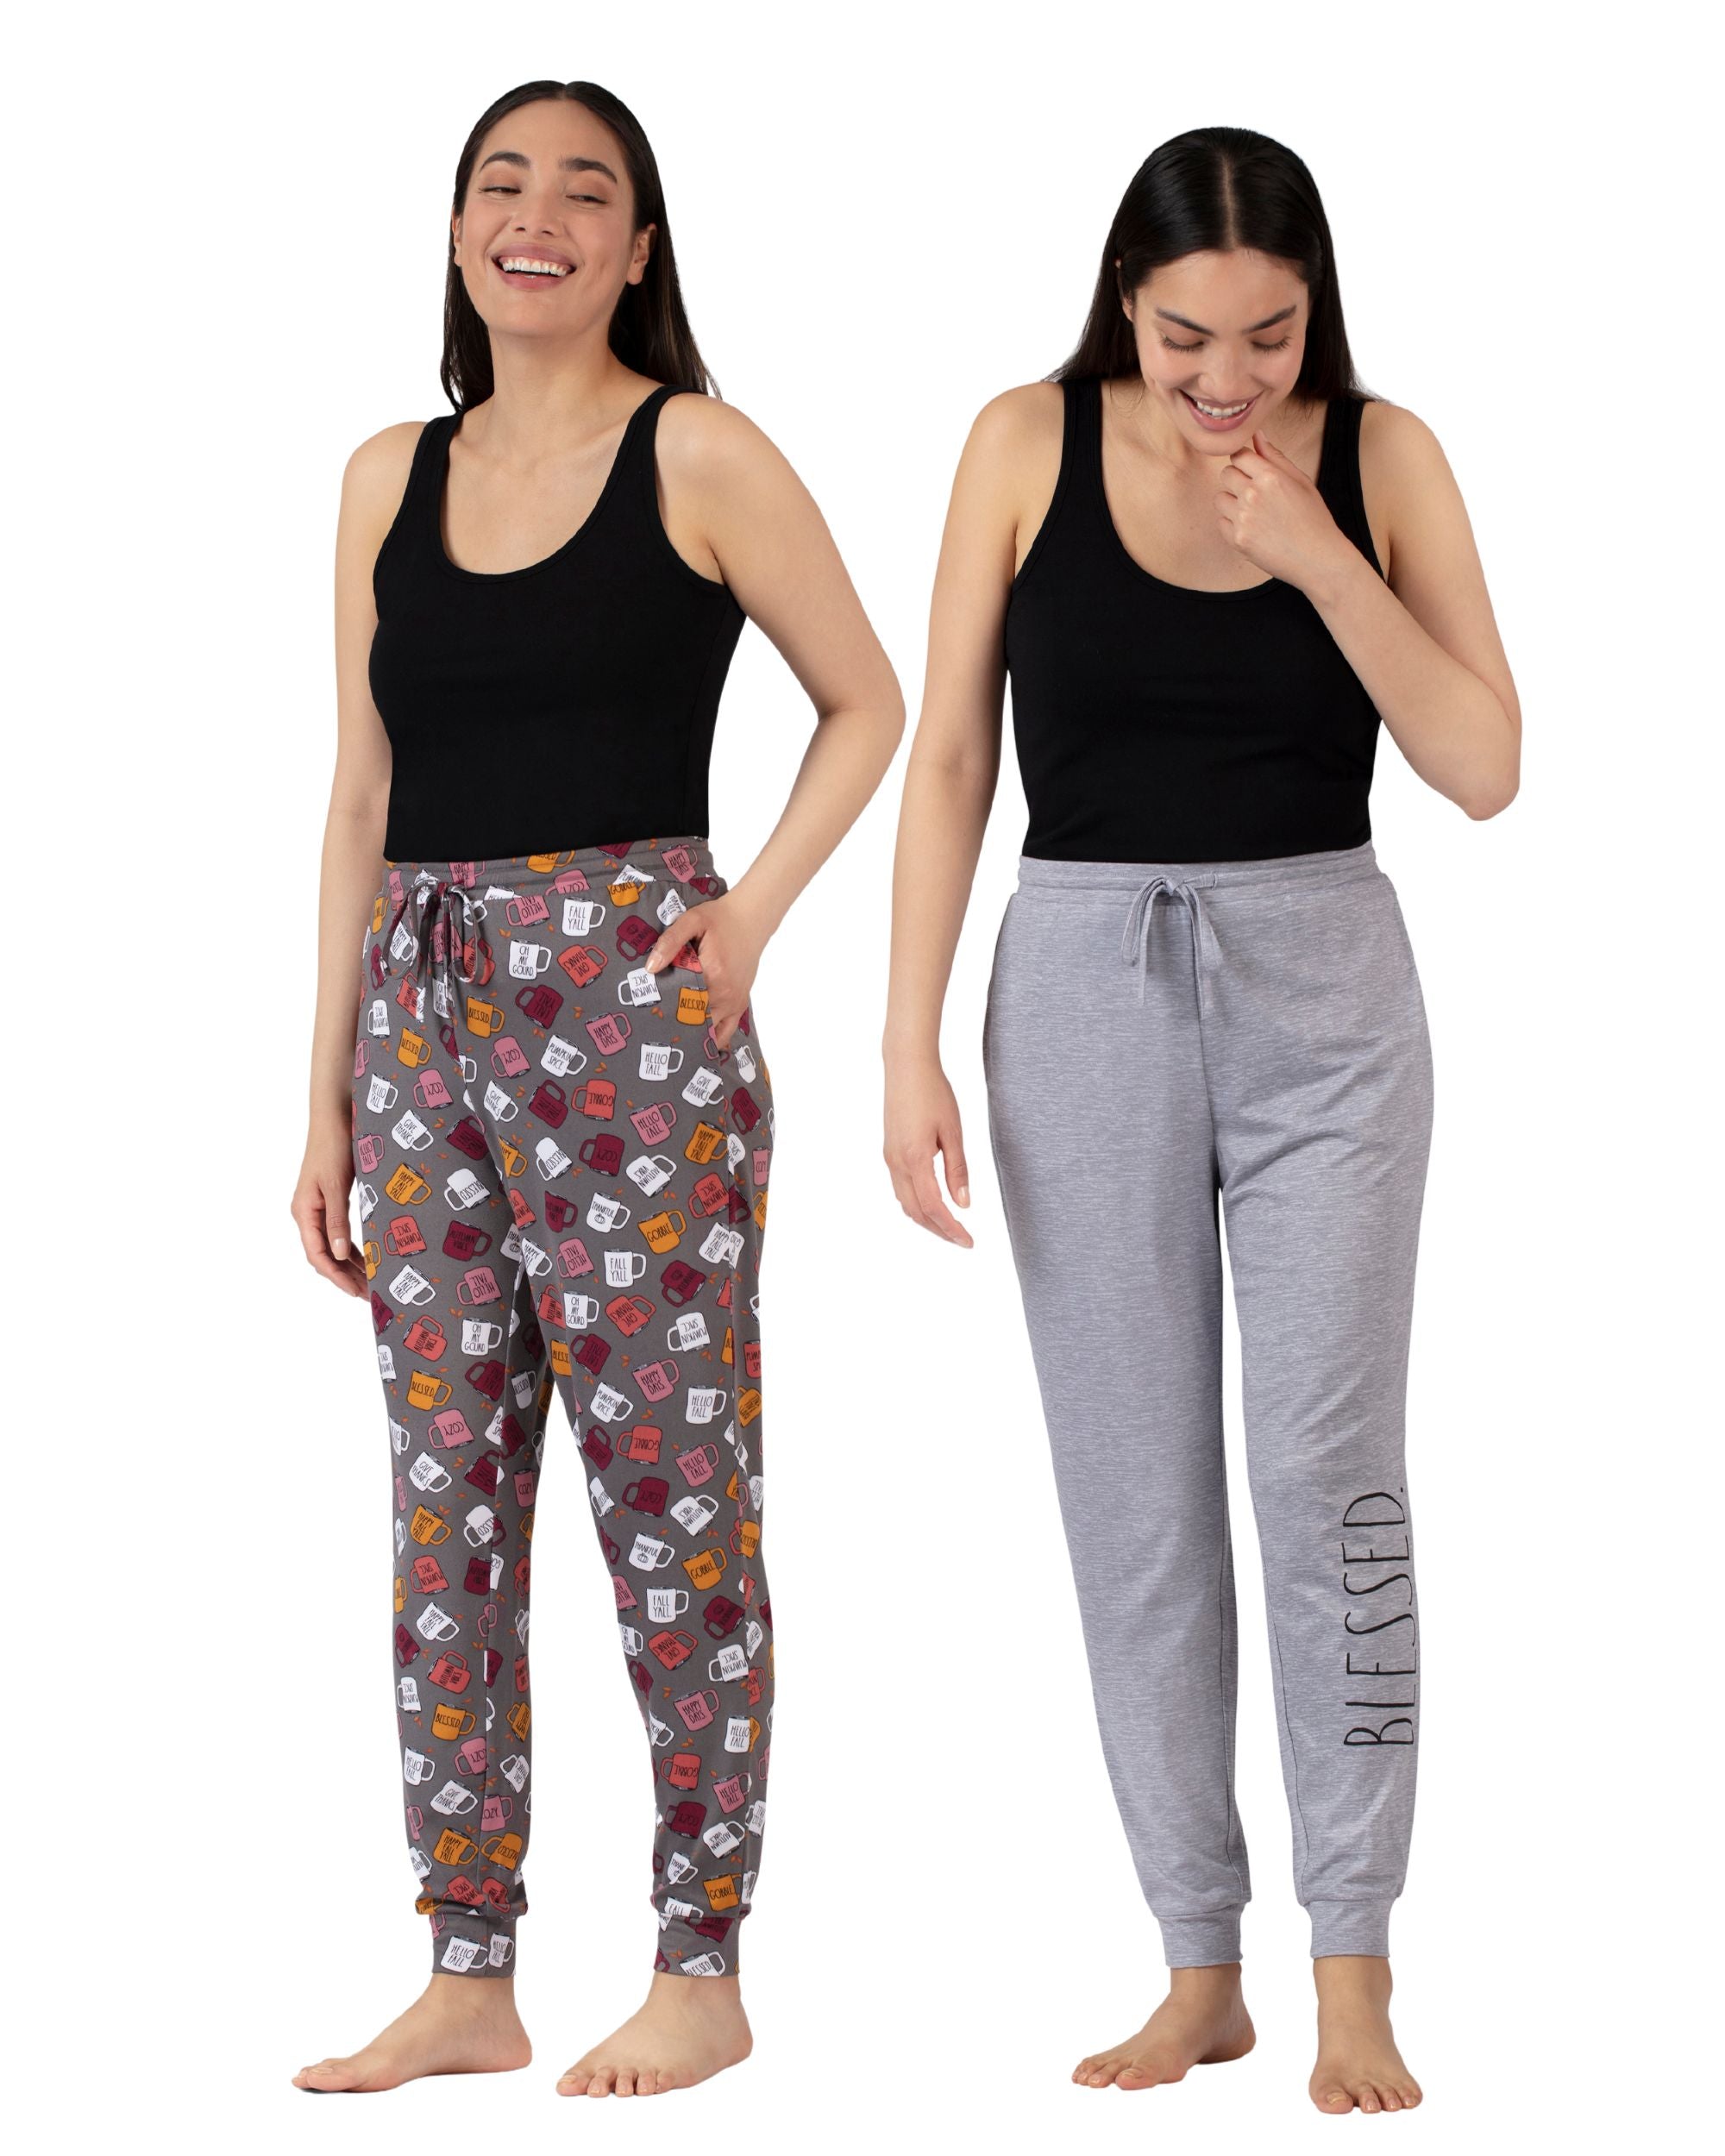 Women's "BLESSED" & Coffee Print 2-Pack Pajama Joggers - Rae Dunn Wear